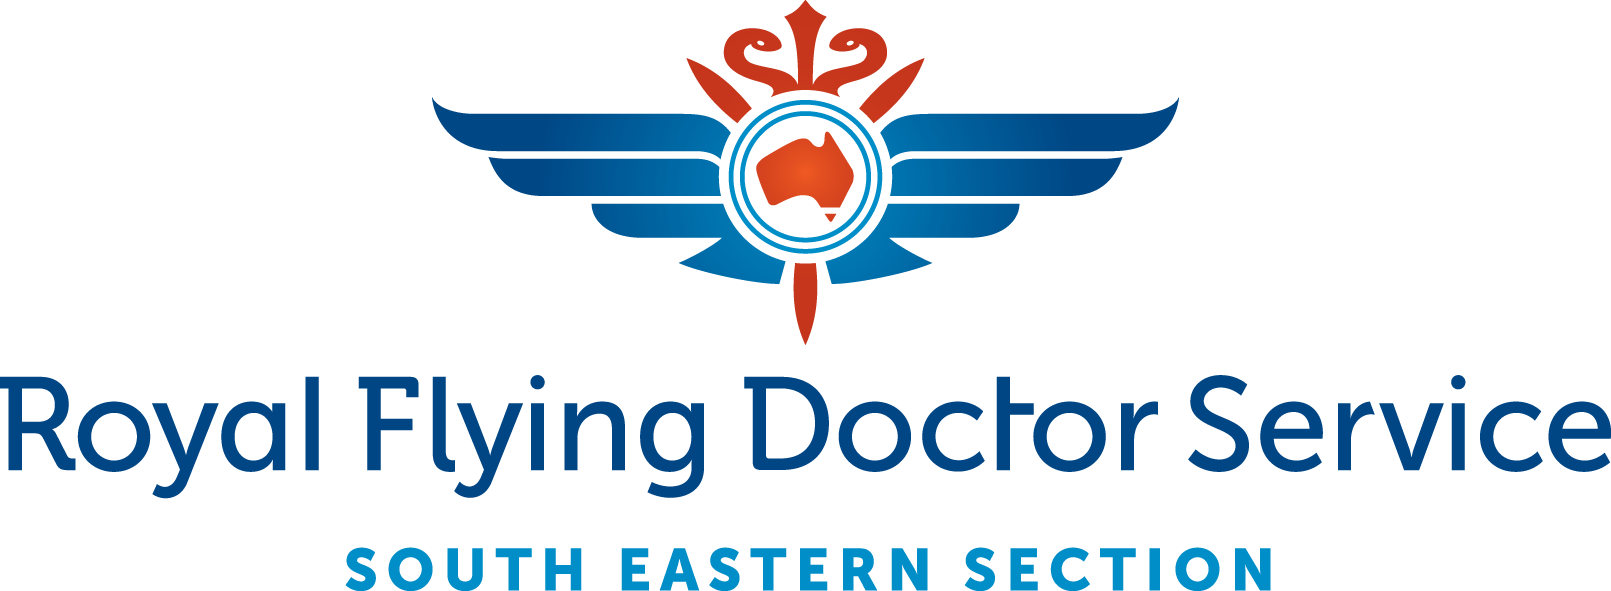 royal-flying-doctor-service-of-australia-brand-png